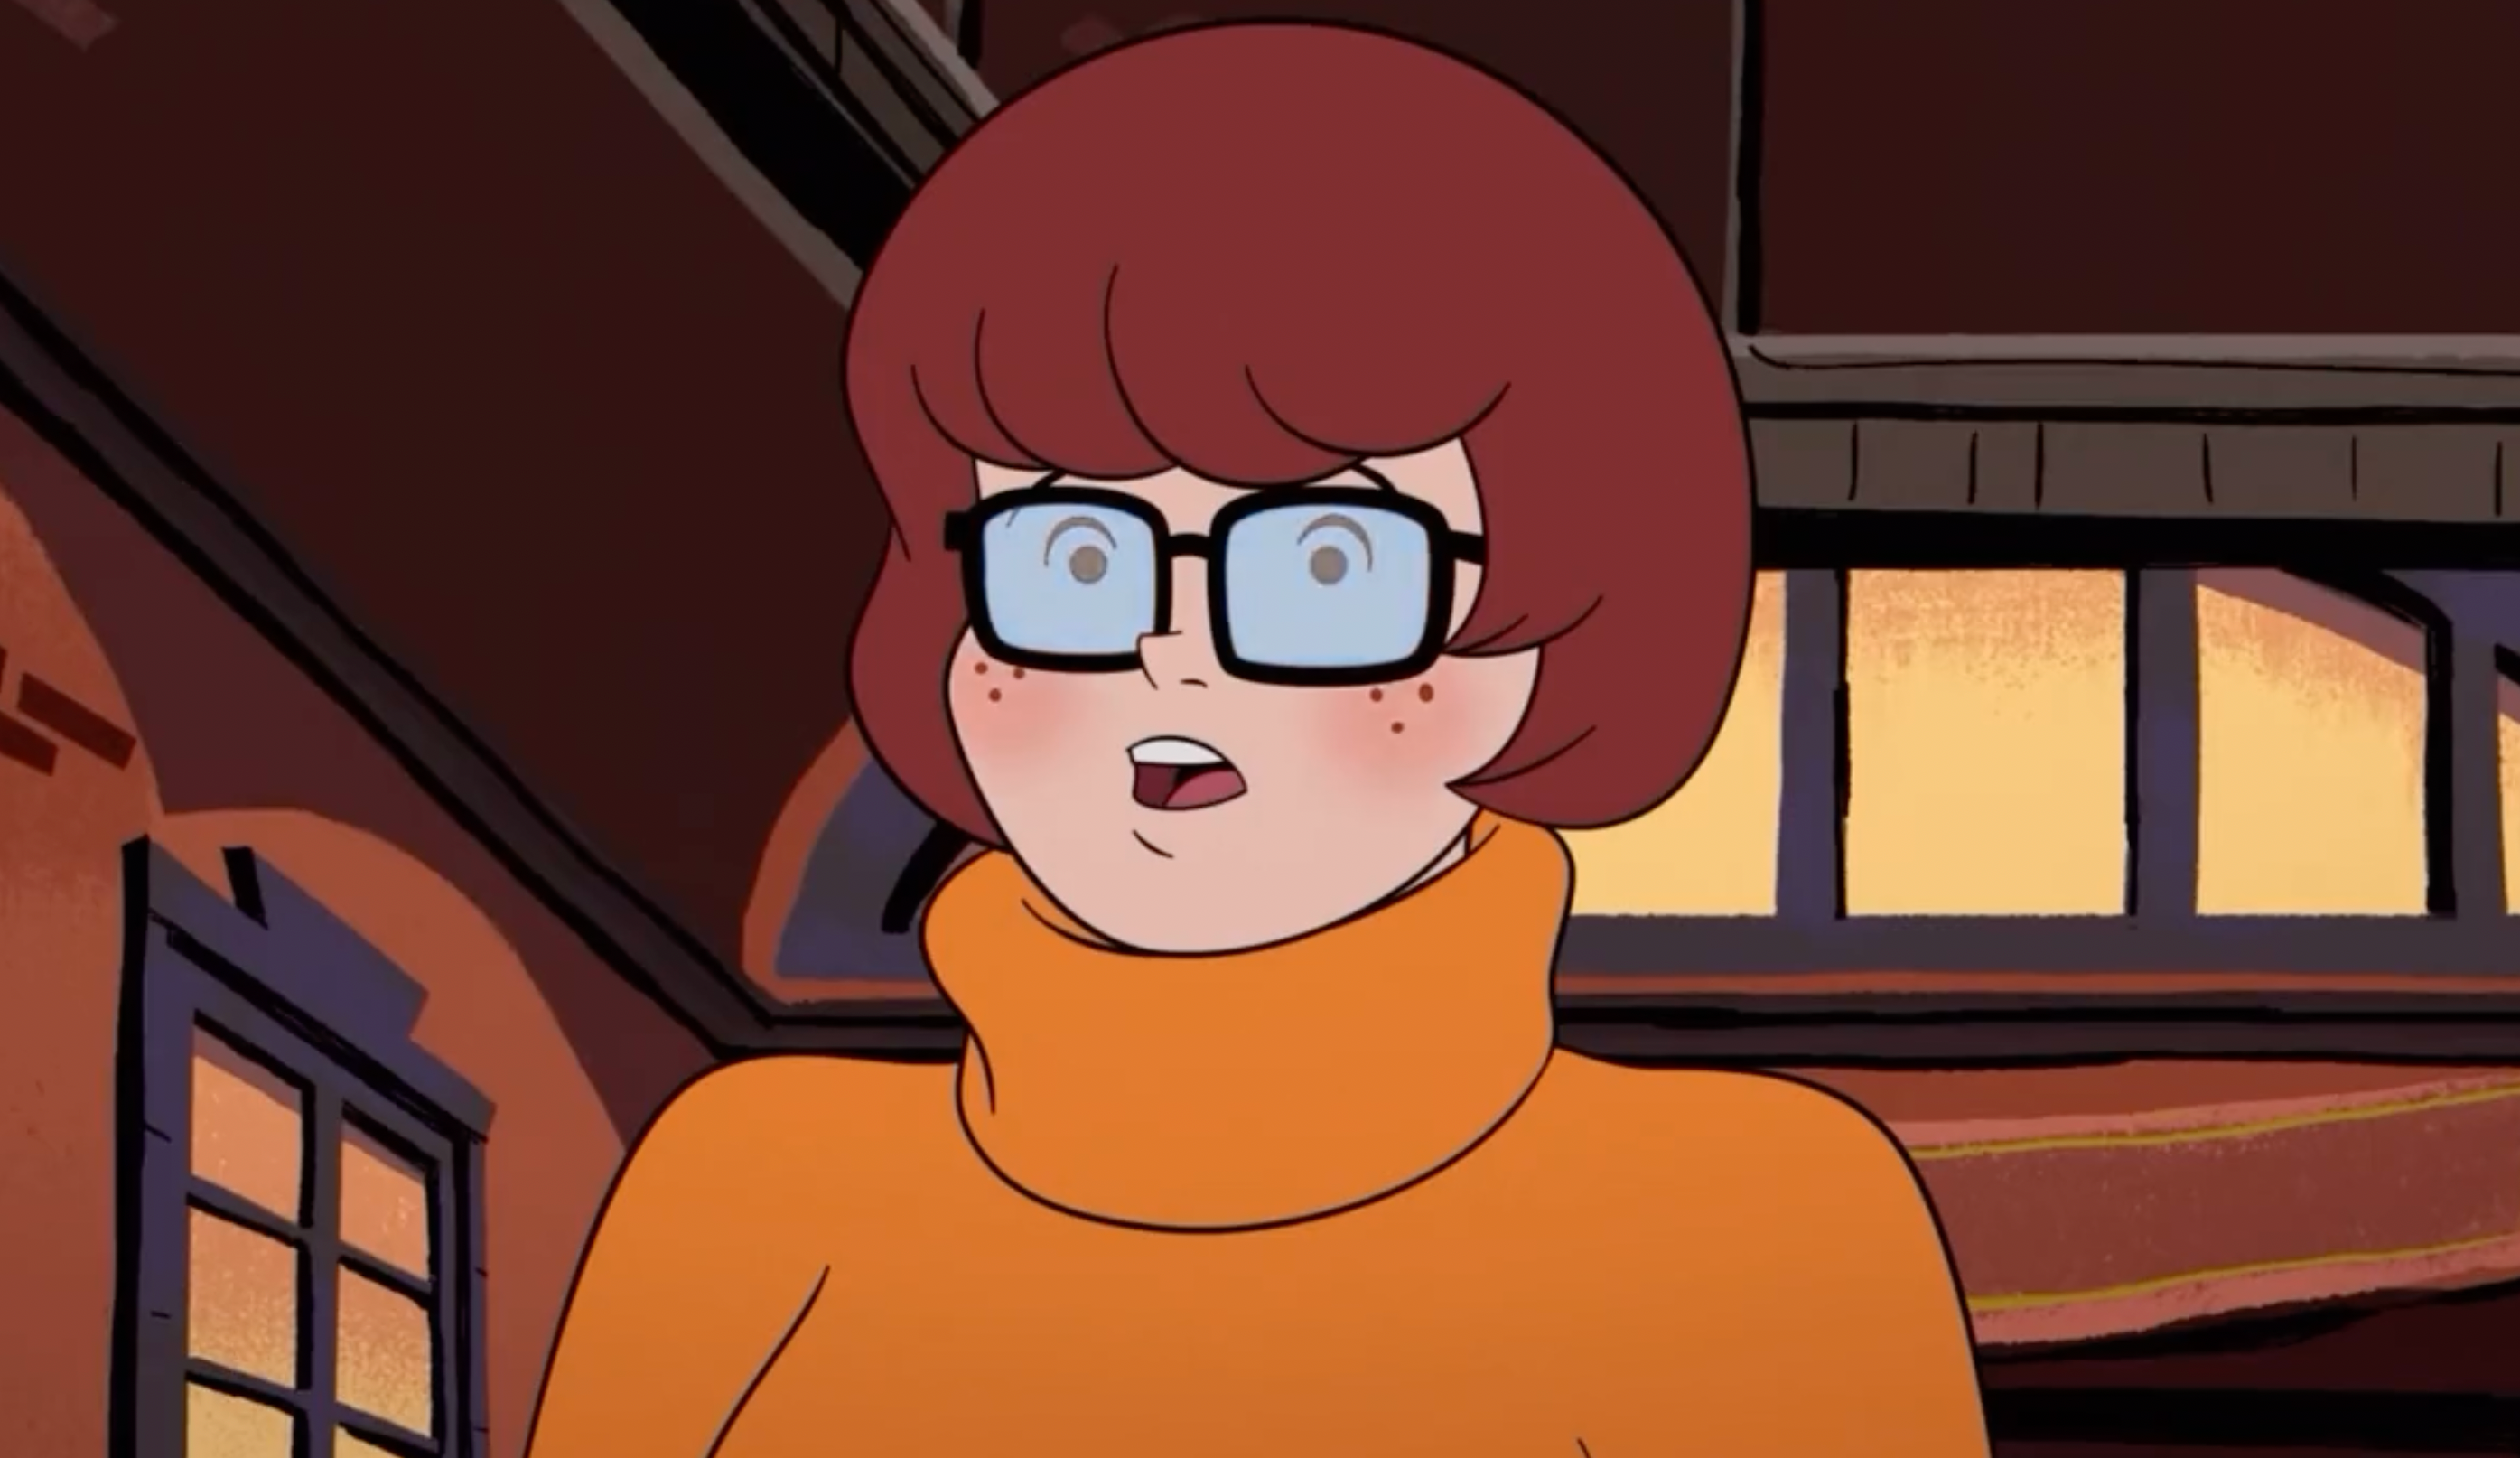 Velma Comes Out In Latest Scooby-Doo Video Movie - Anime Superhero News